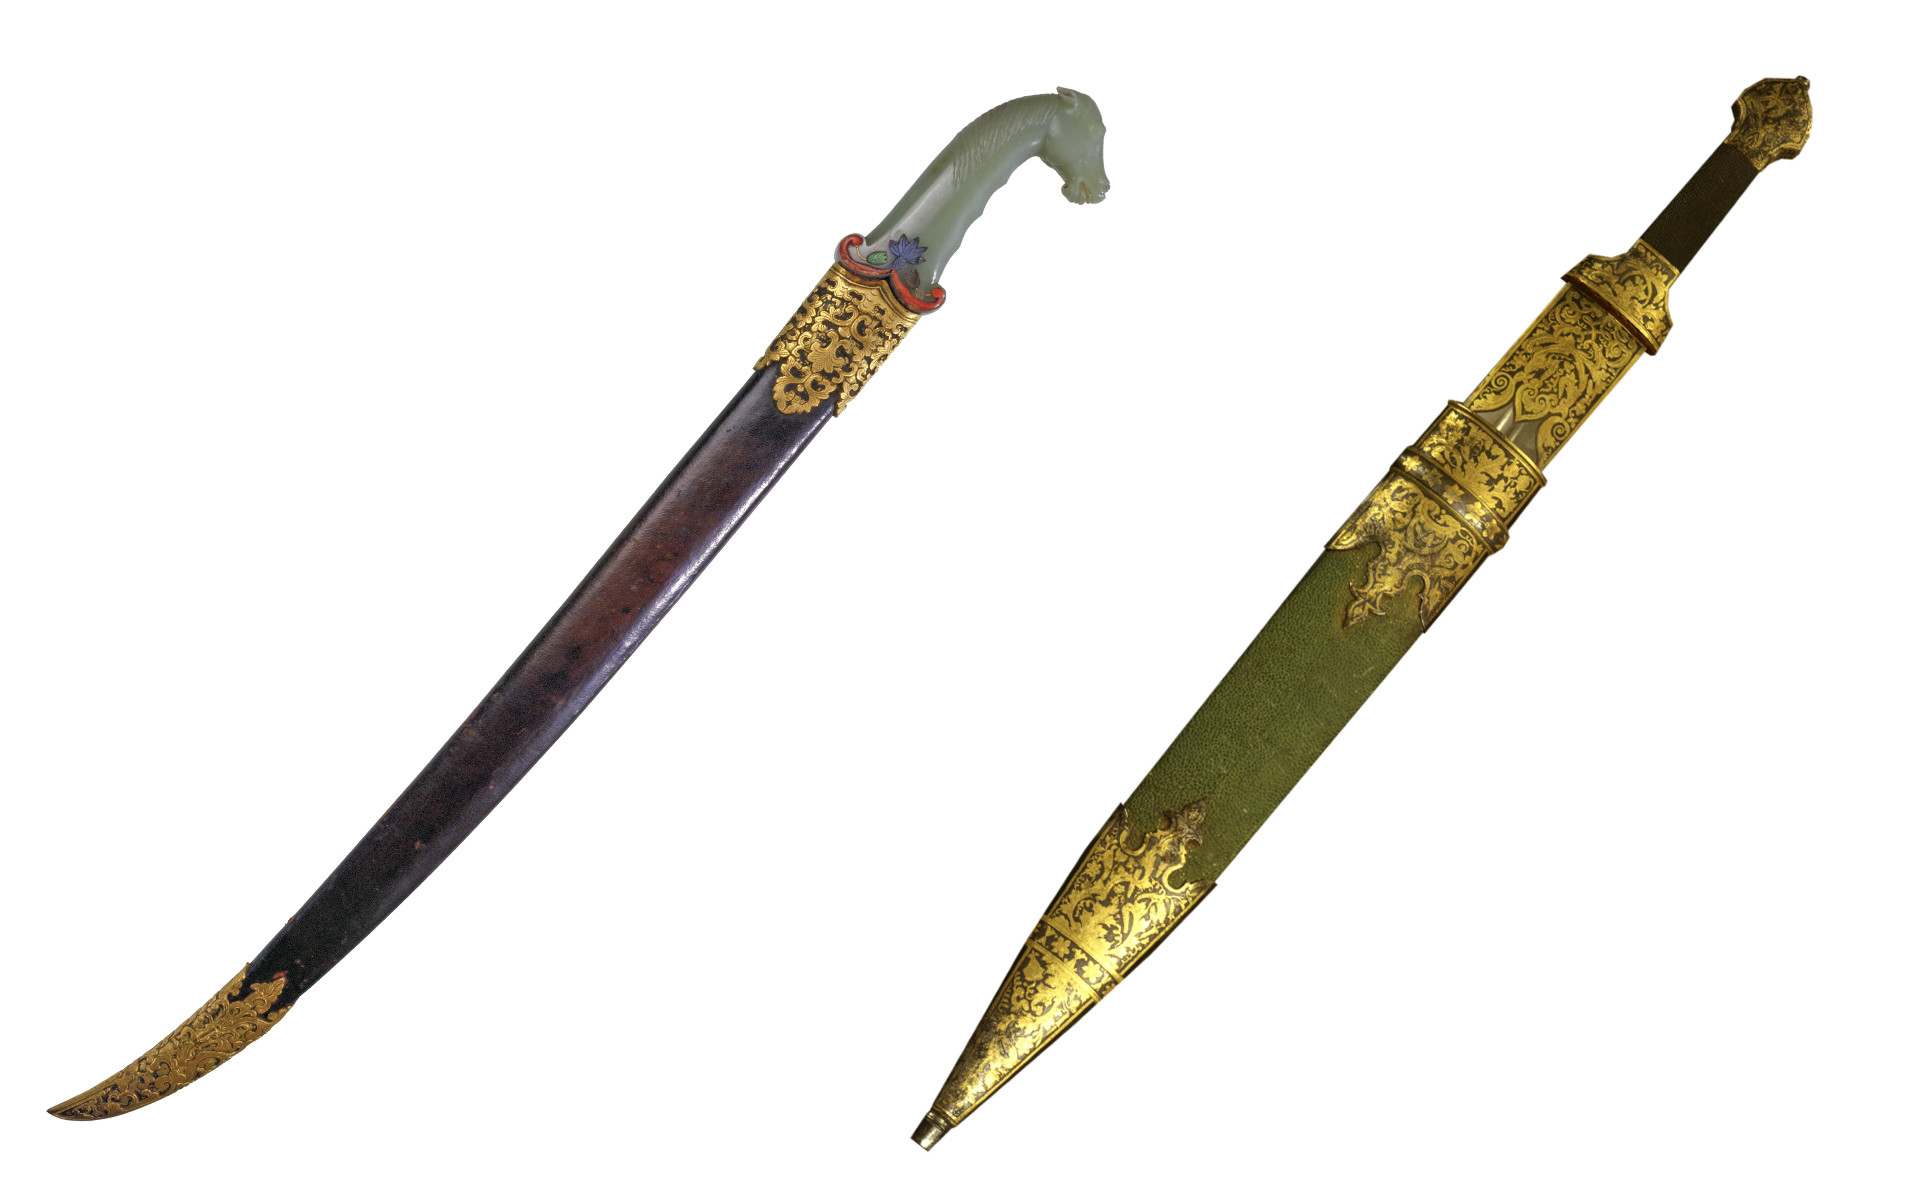 Left: Chinese dagger of the Quing era, the Palace Museum.
Right: Russian dagger. Zlatoust. Late XIX c. State Historical Museum. Moscow.